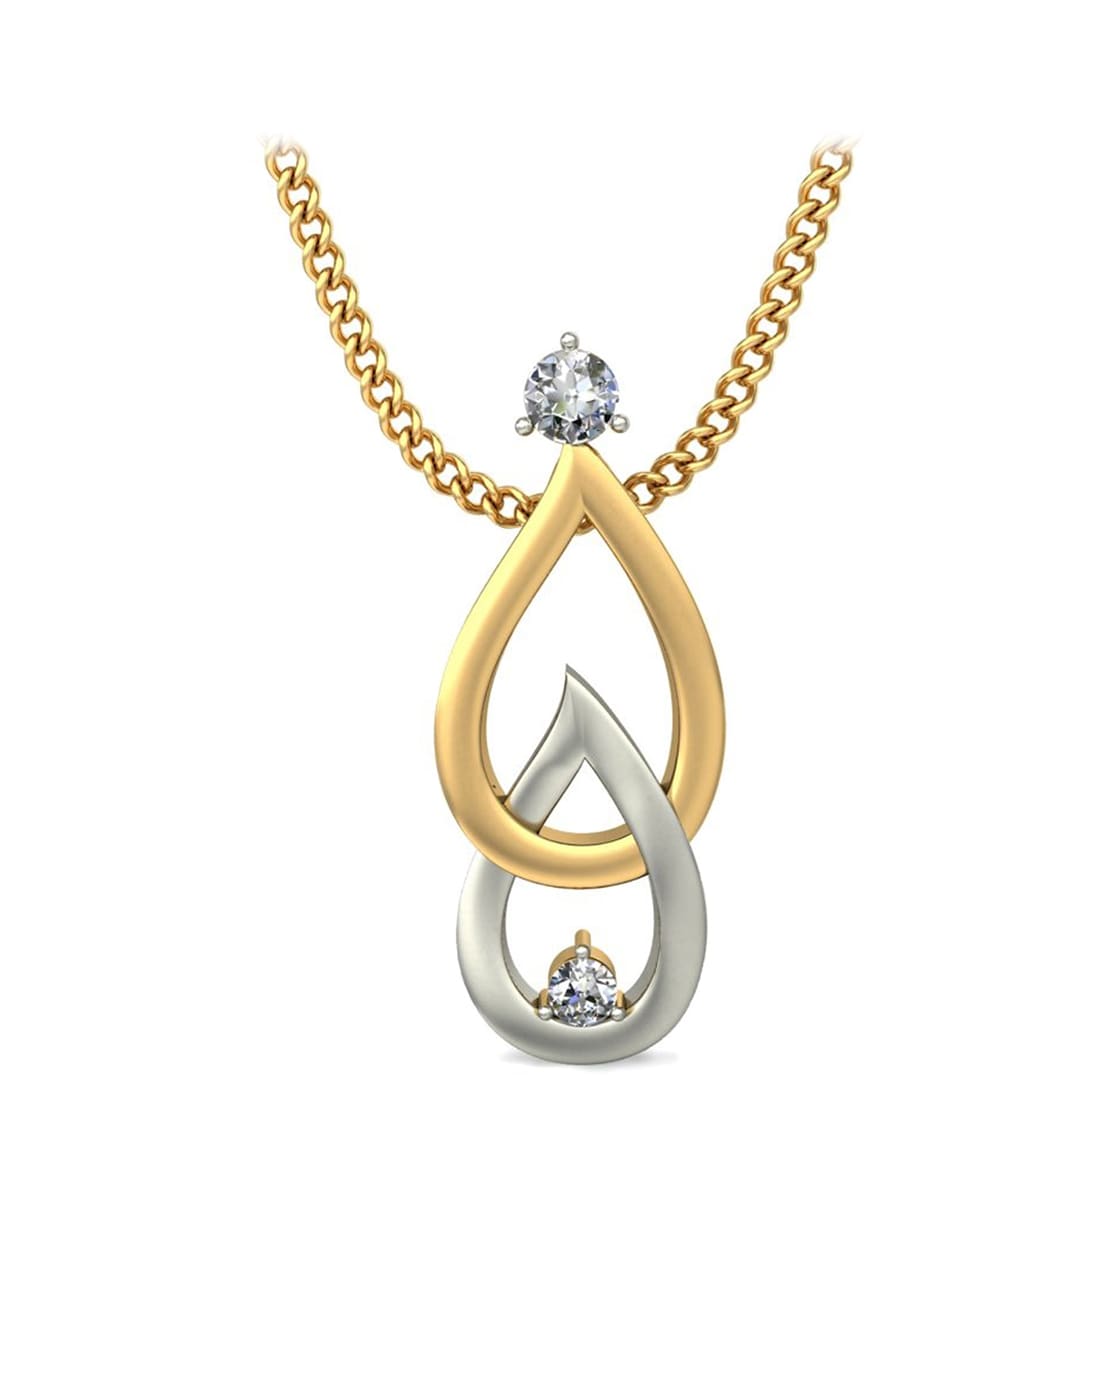 Diamond Row Yellow Gold Necklace in 18k | Mabel Chong